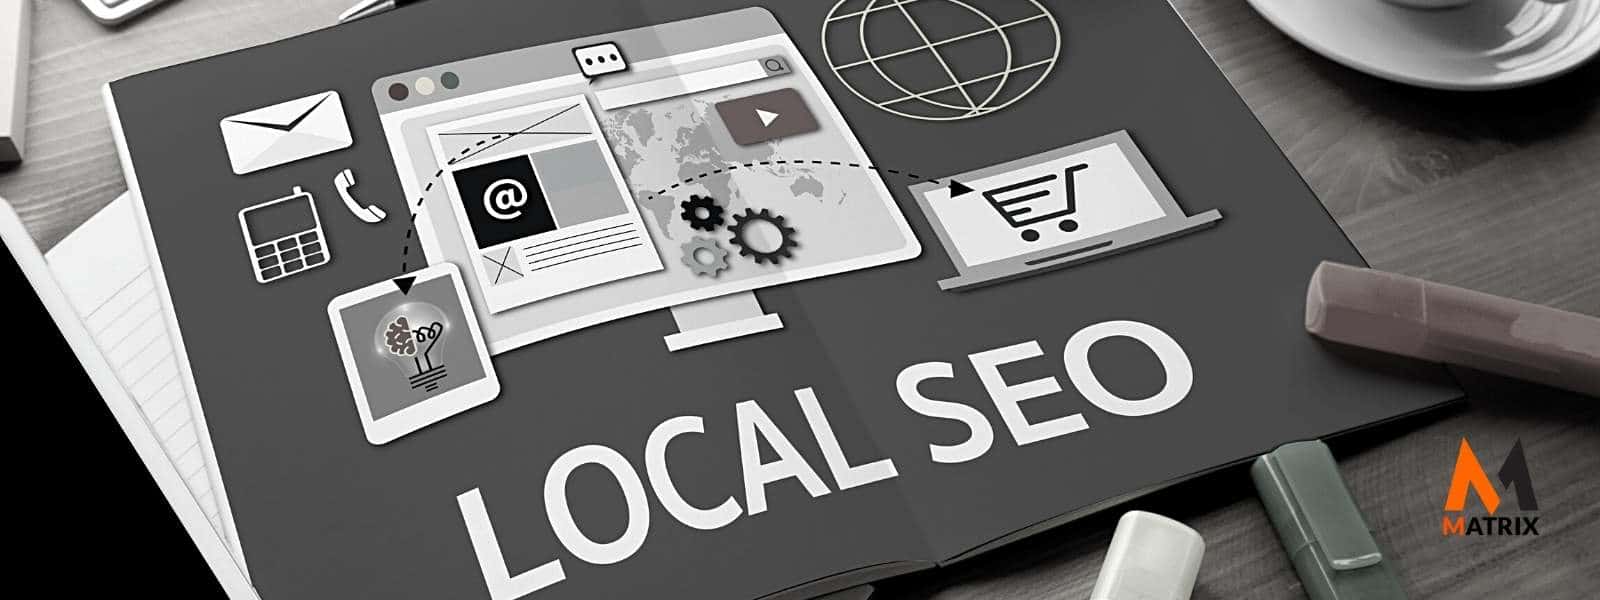 What is Local SEO